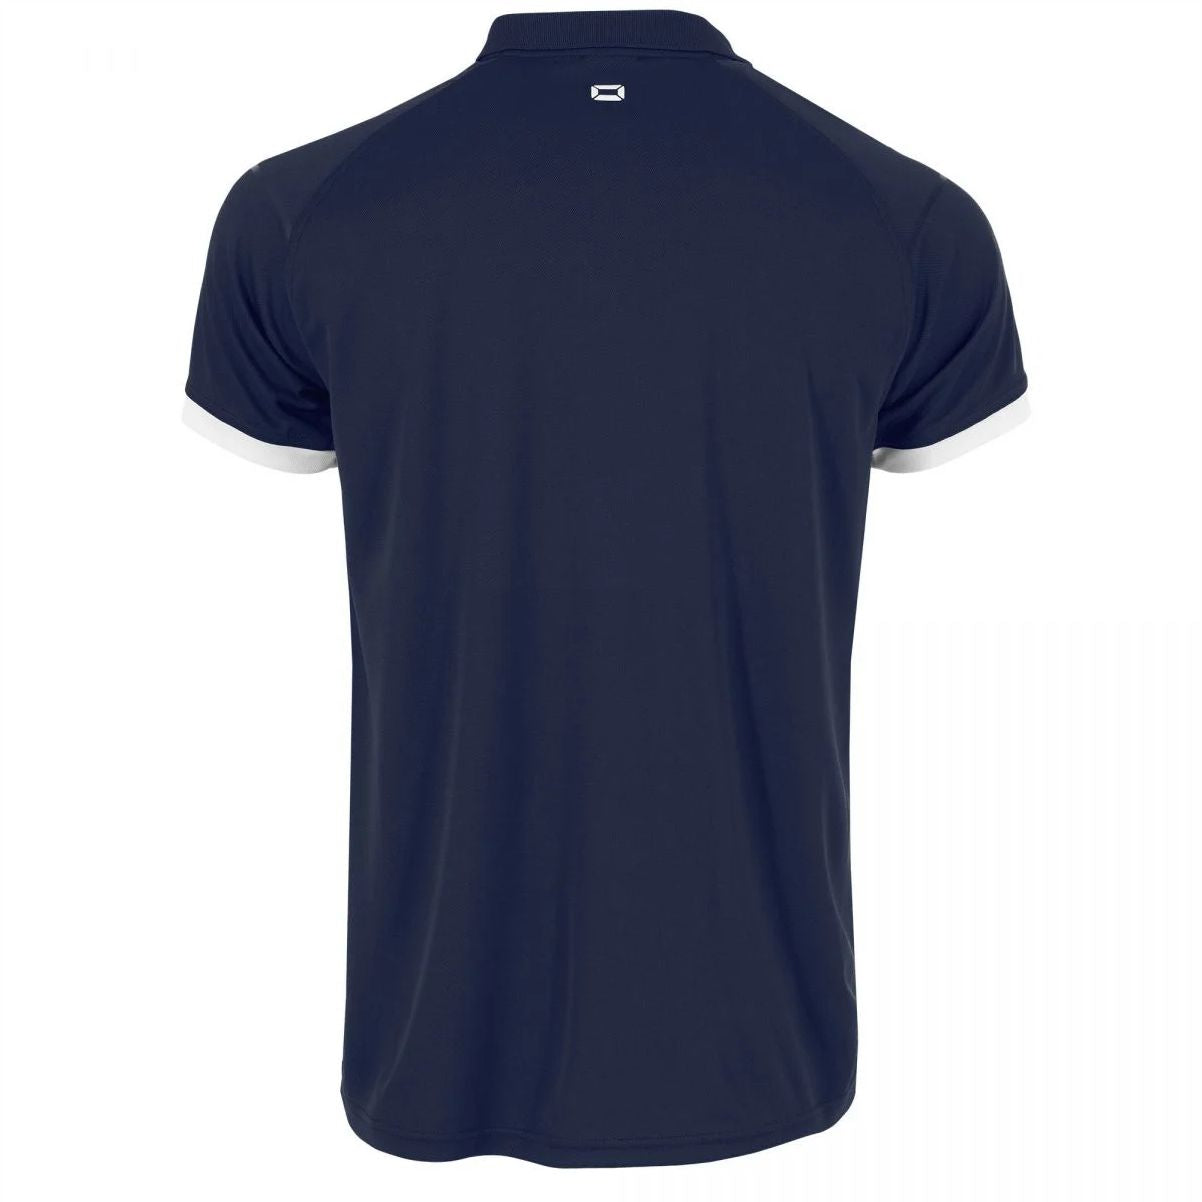 Stanno - First Polo - Navy - Adult